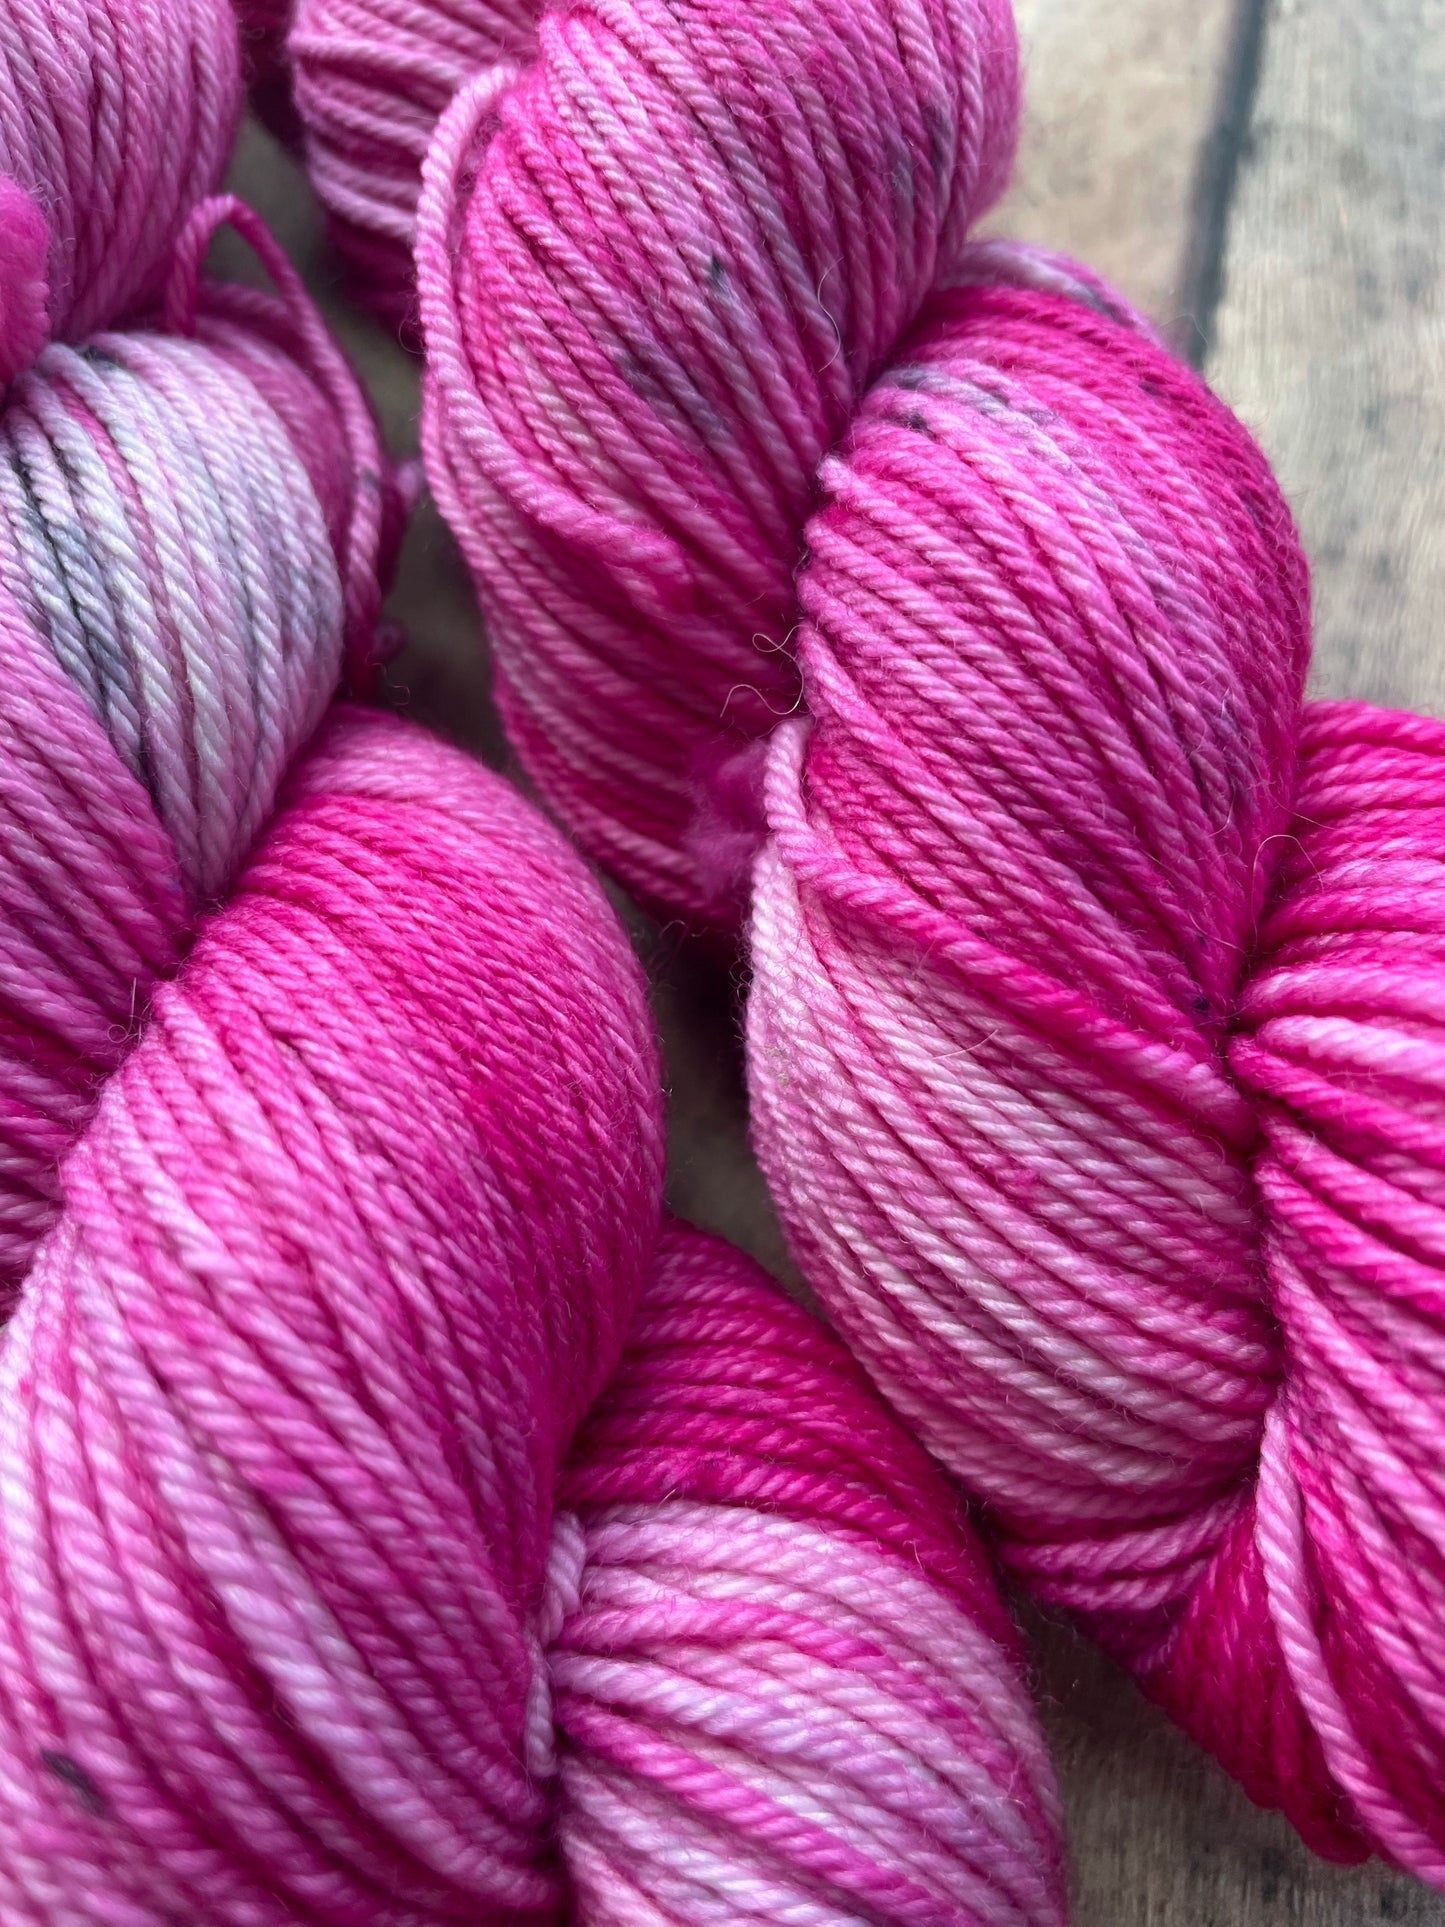 Rambunctious - Drizzy DK - hand dyed yarn